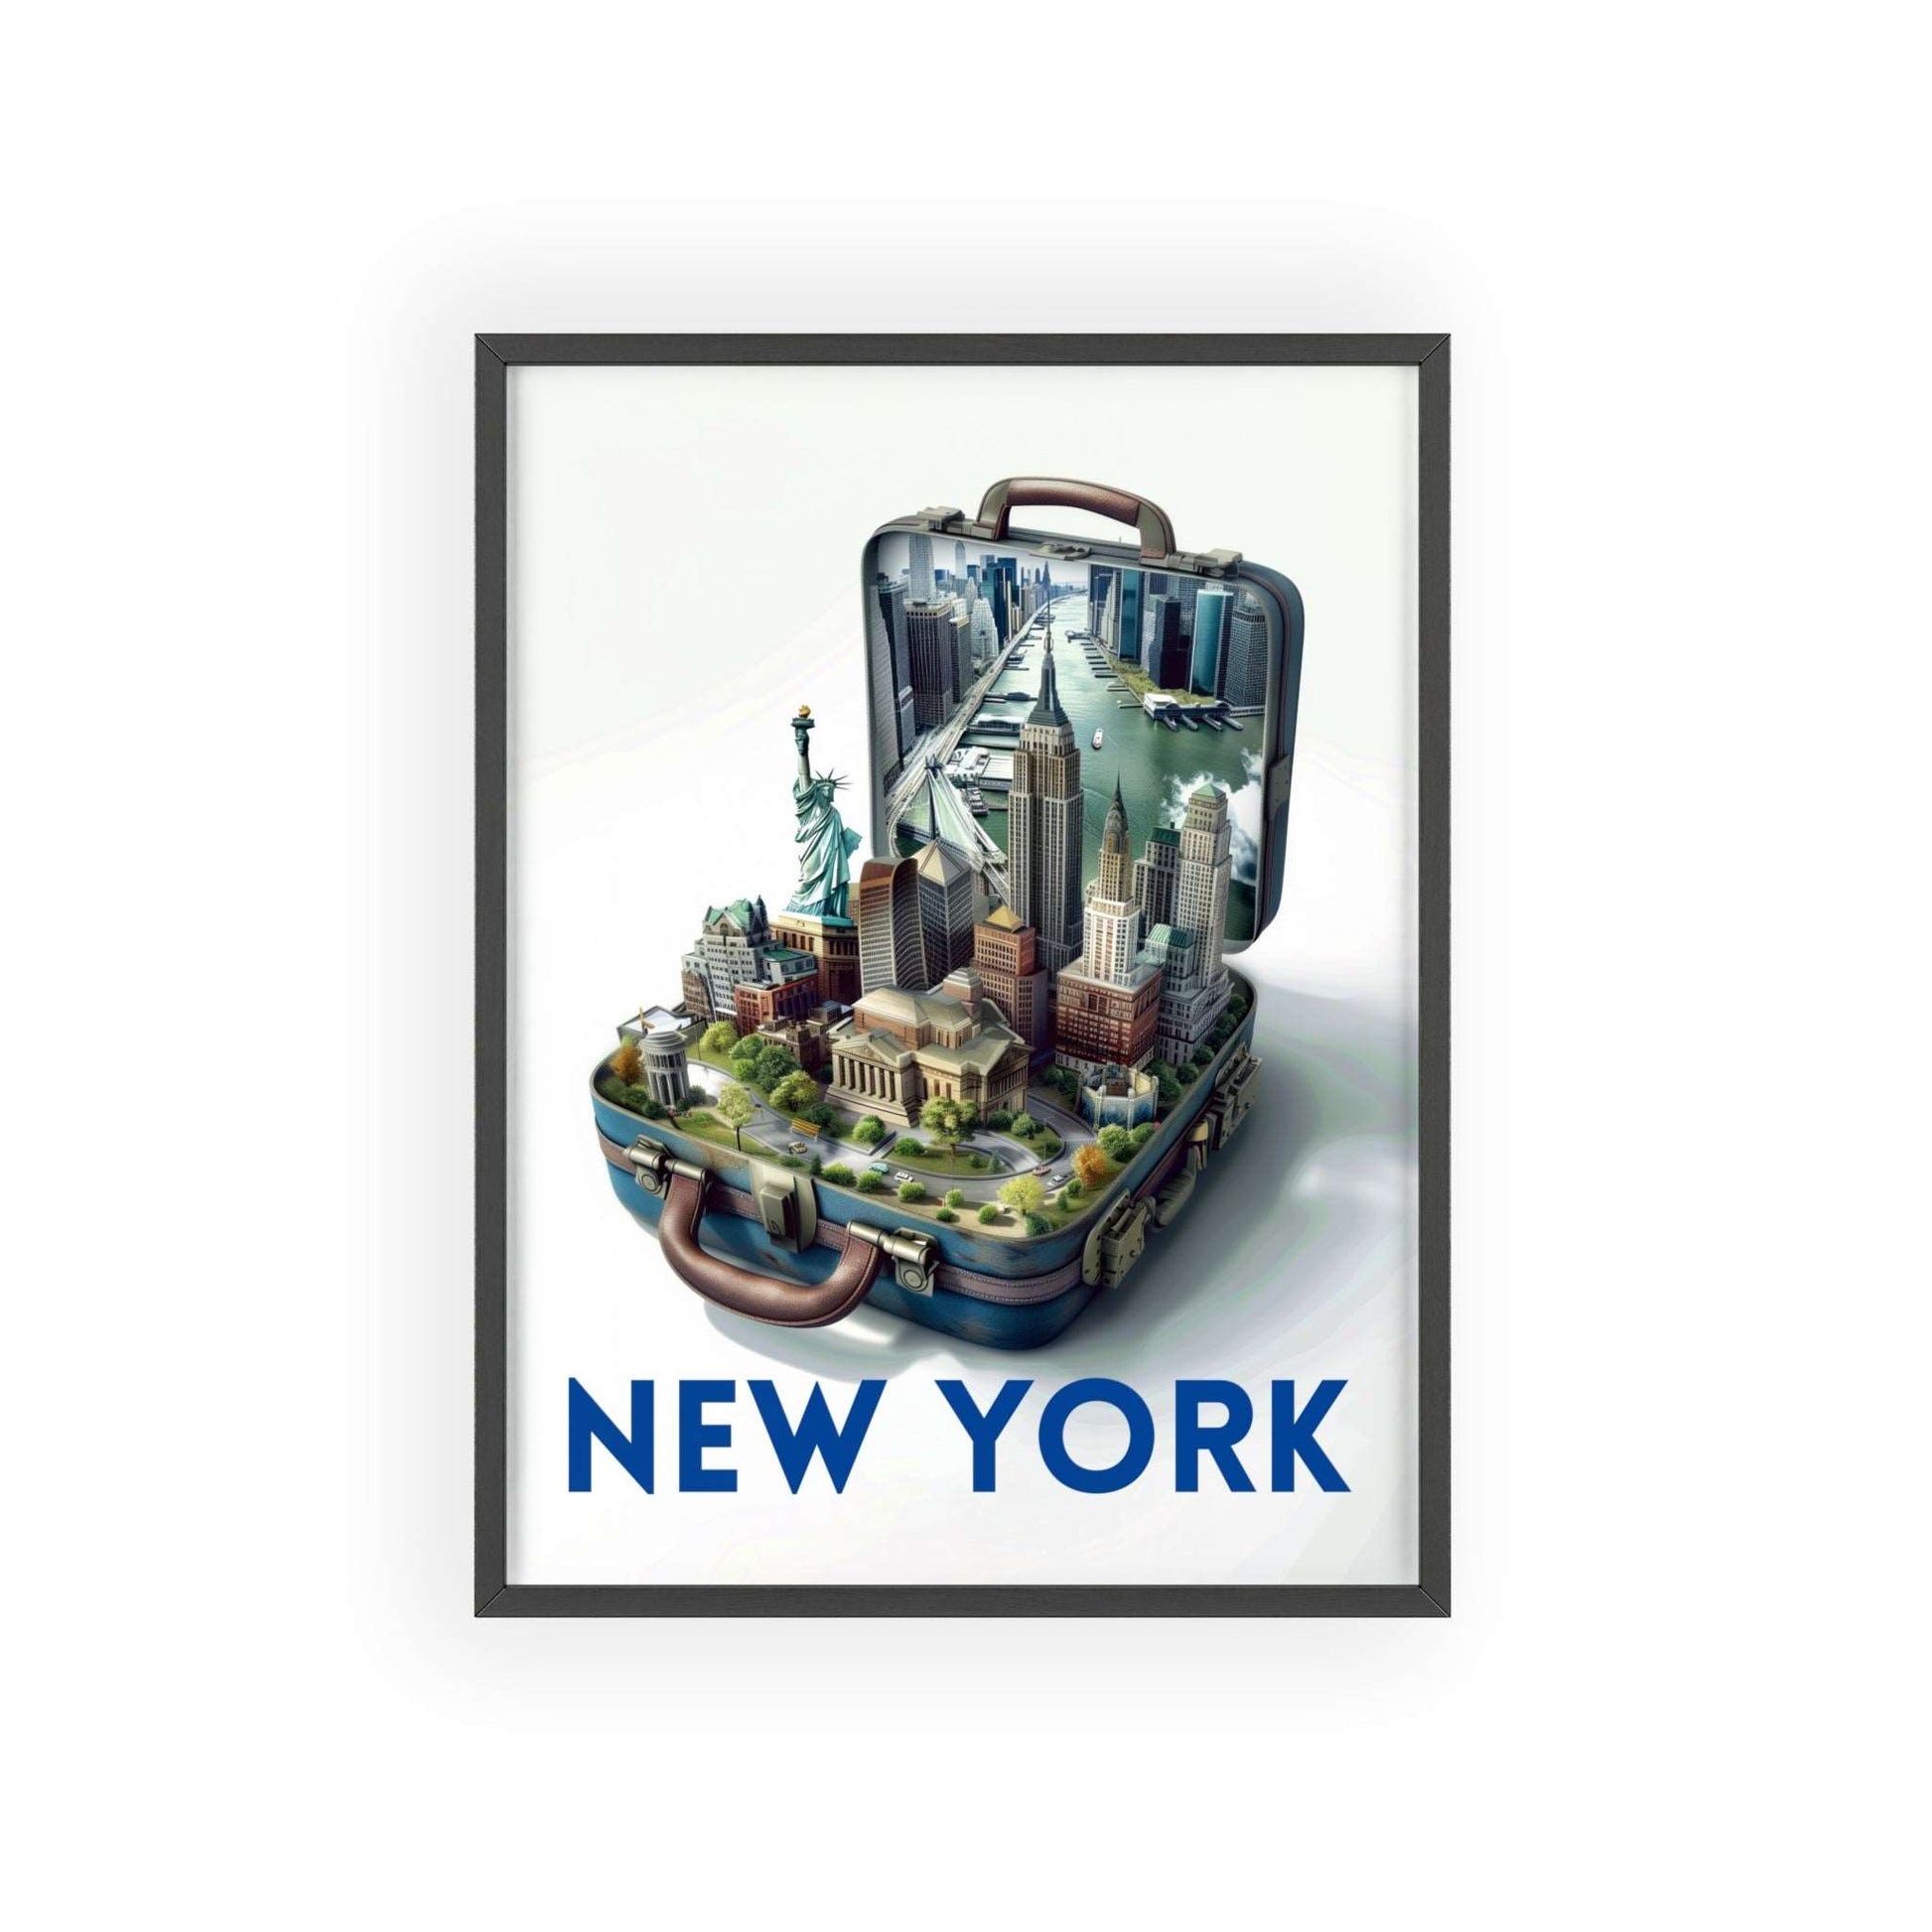 New York in a Suitcase. Elegant Travel Poster for Timeless Home Decor